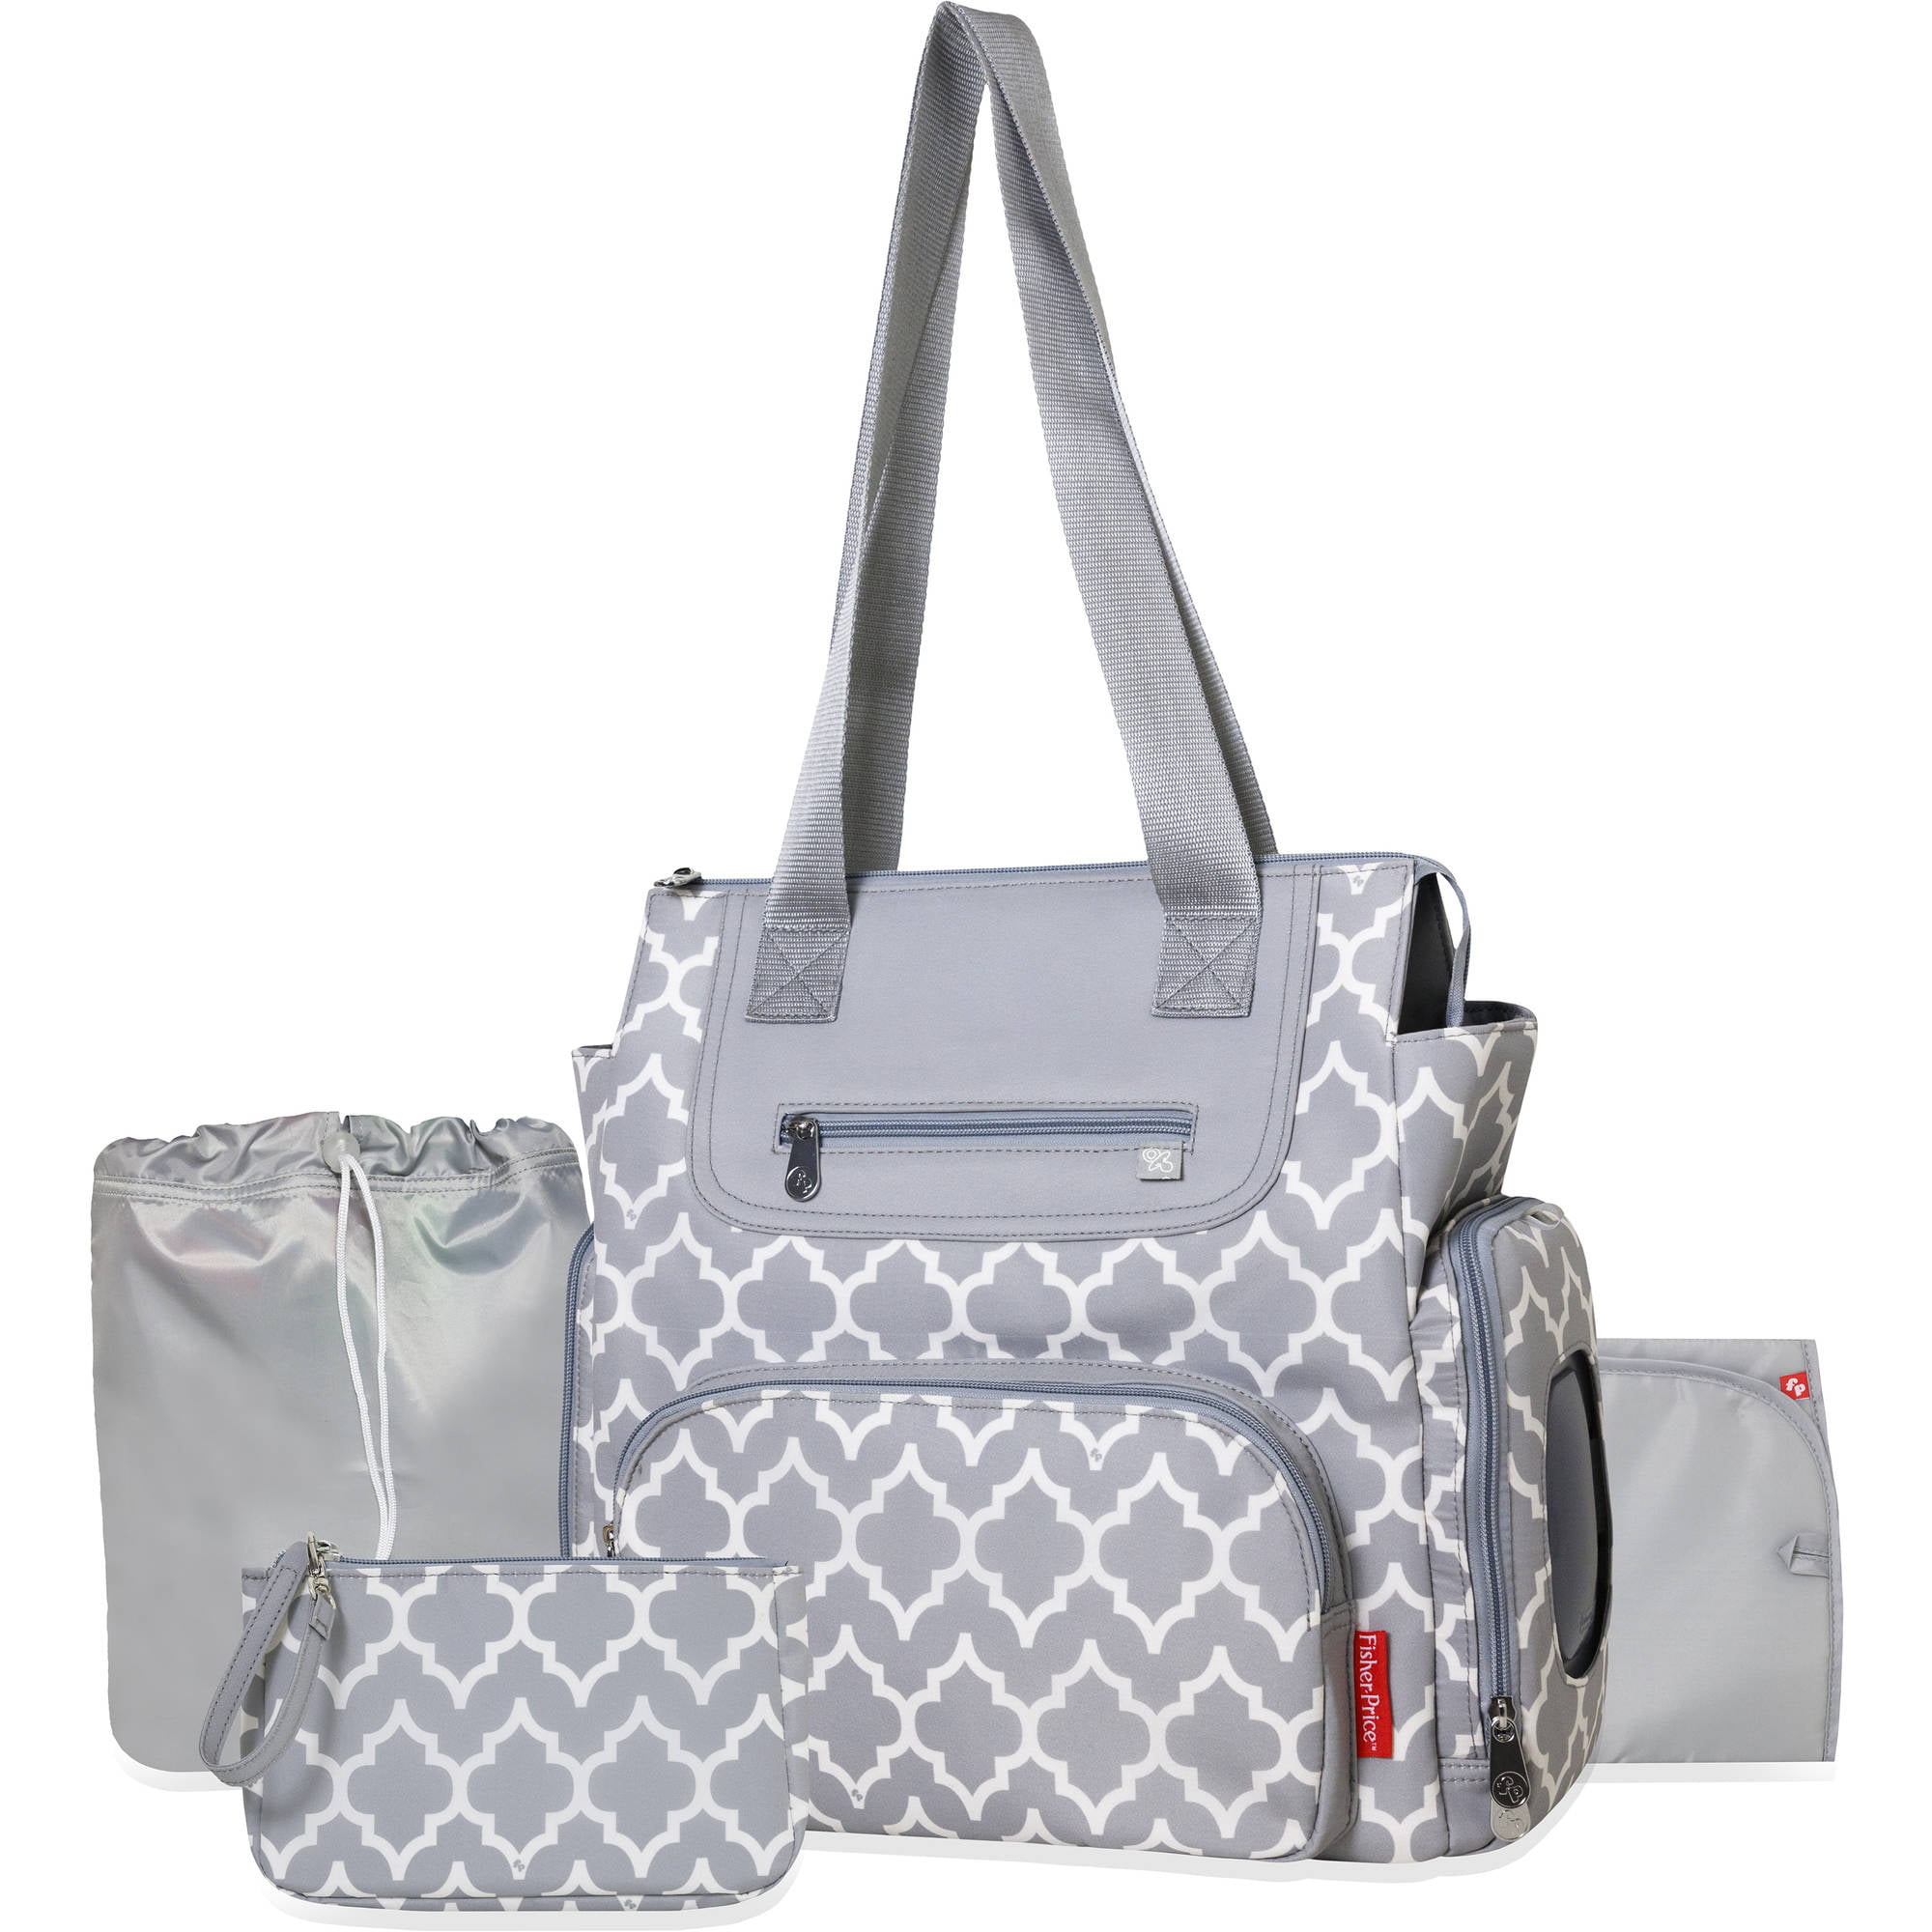 New Fisher Price Fastfinder Deluxe Diaper Bag - light color lining